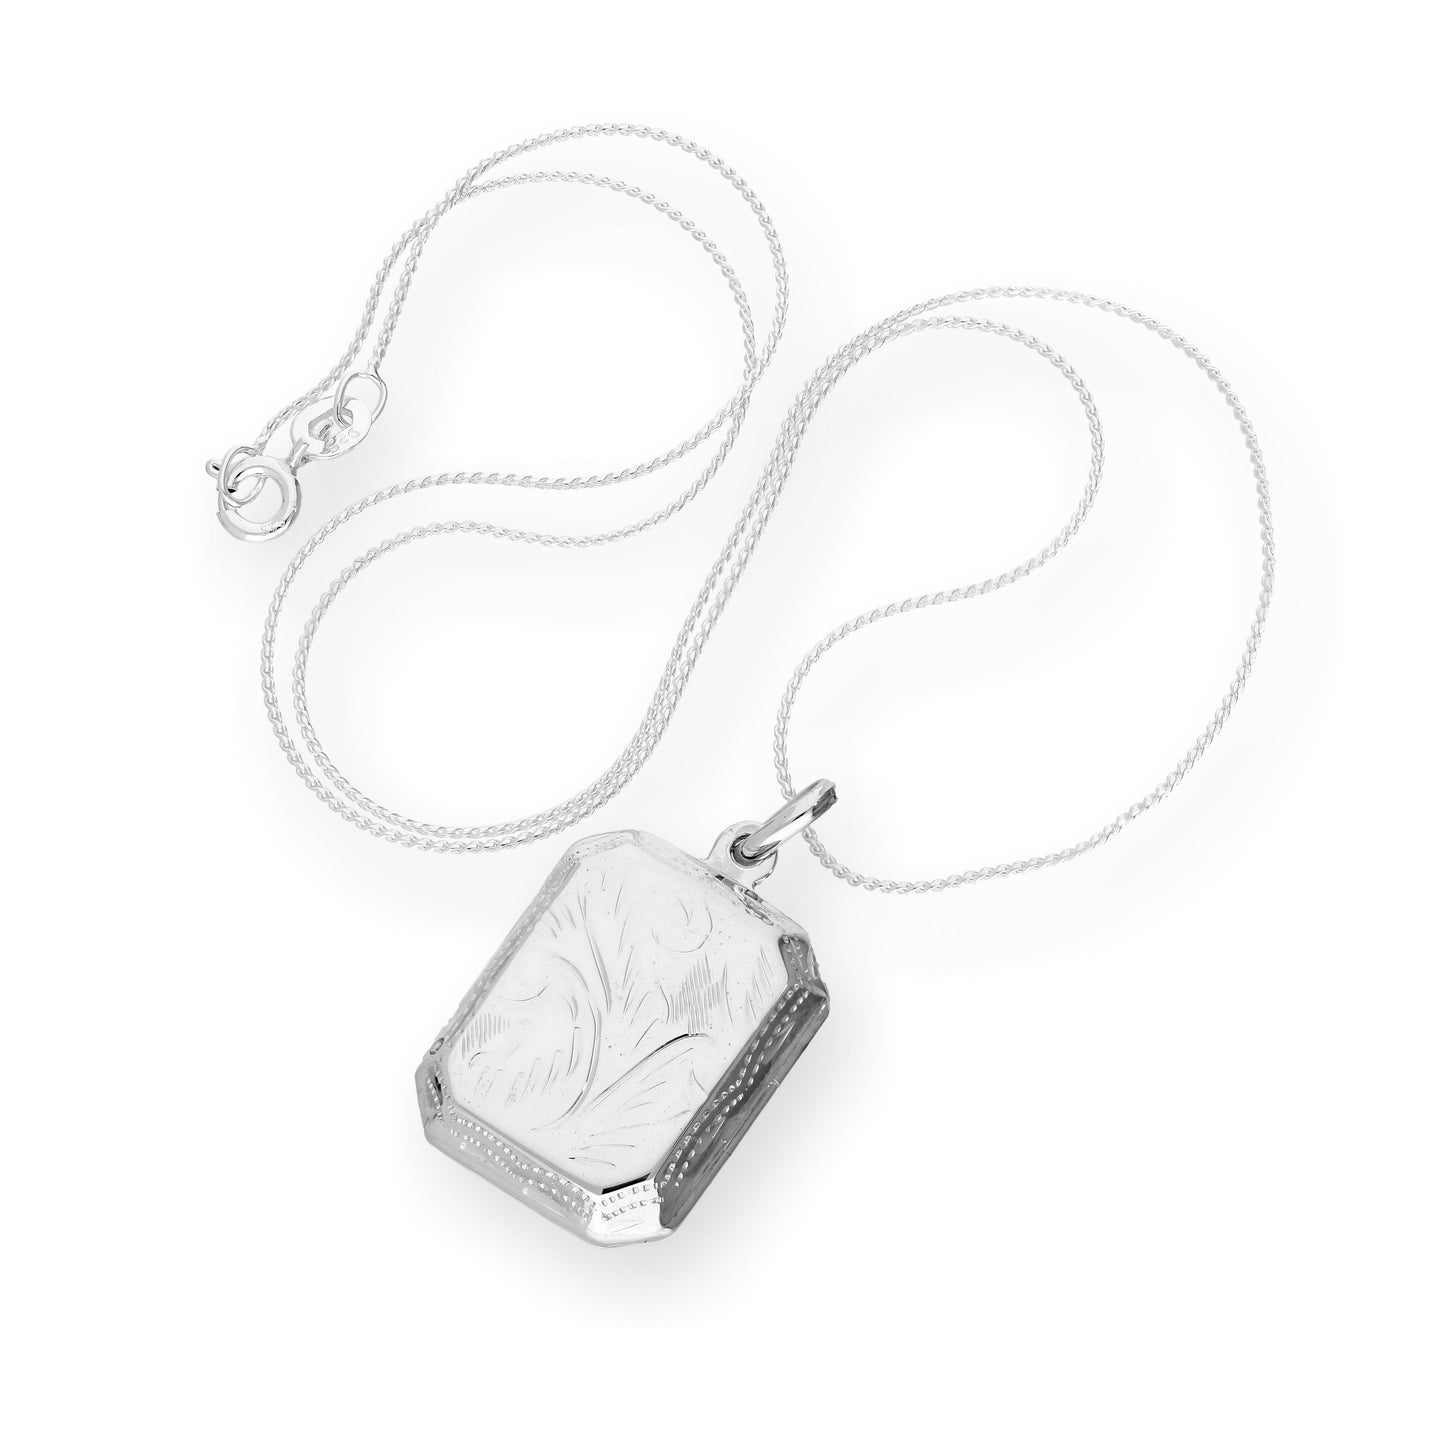 Sterling Silver Engraved Octagonal Locket on Chain 16 - 22 Inches